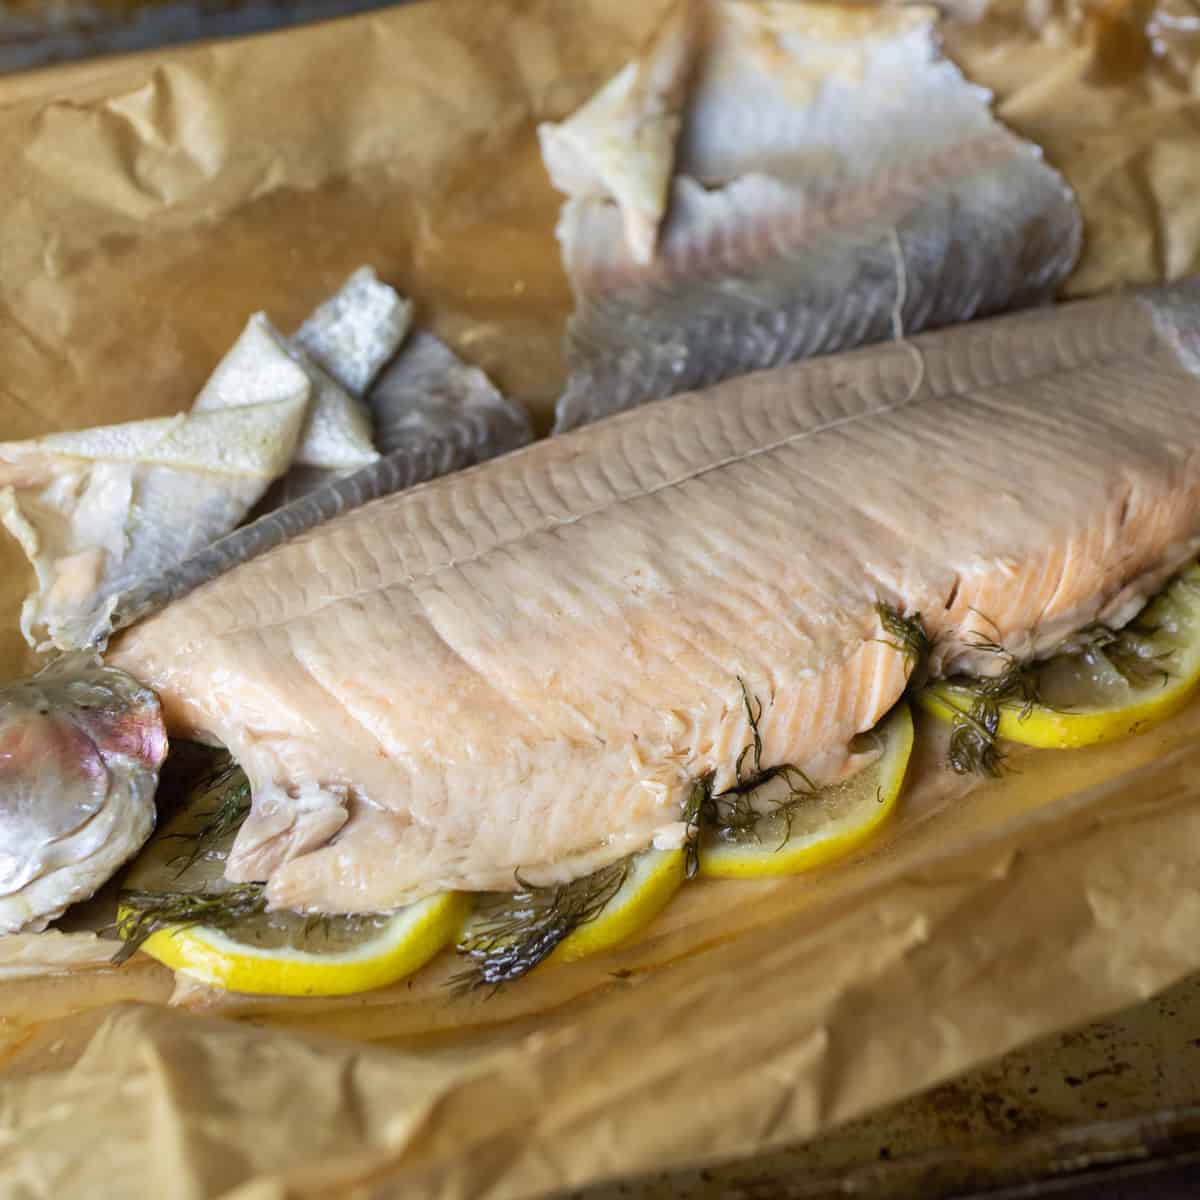 A baked fish with skin pulled back.